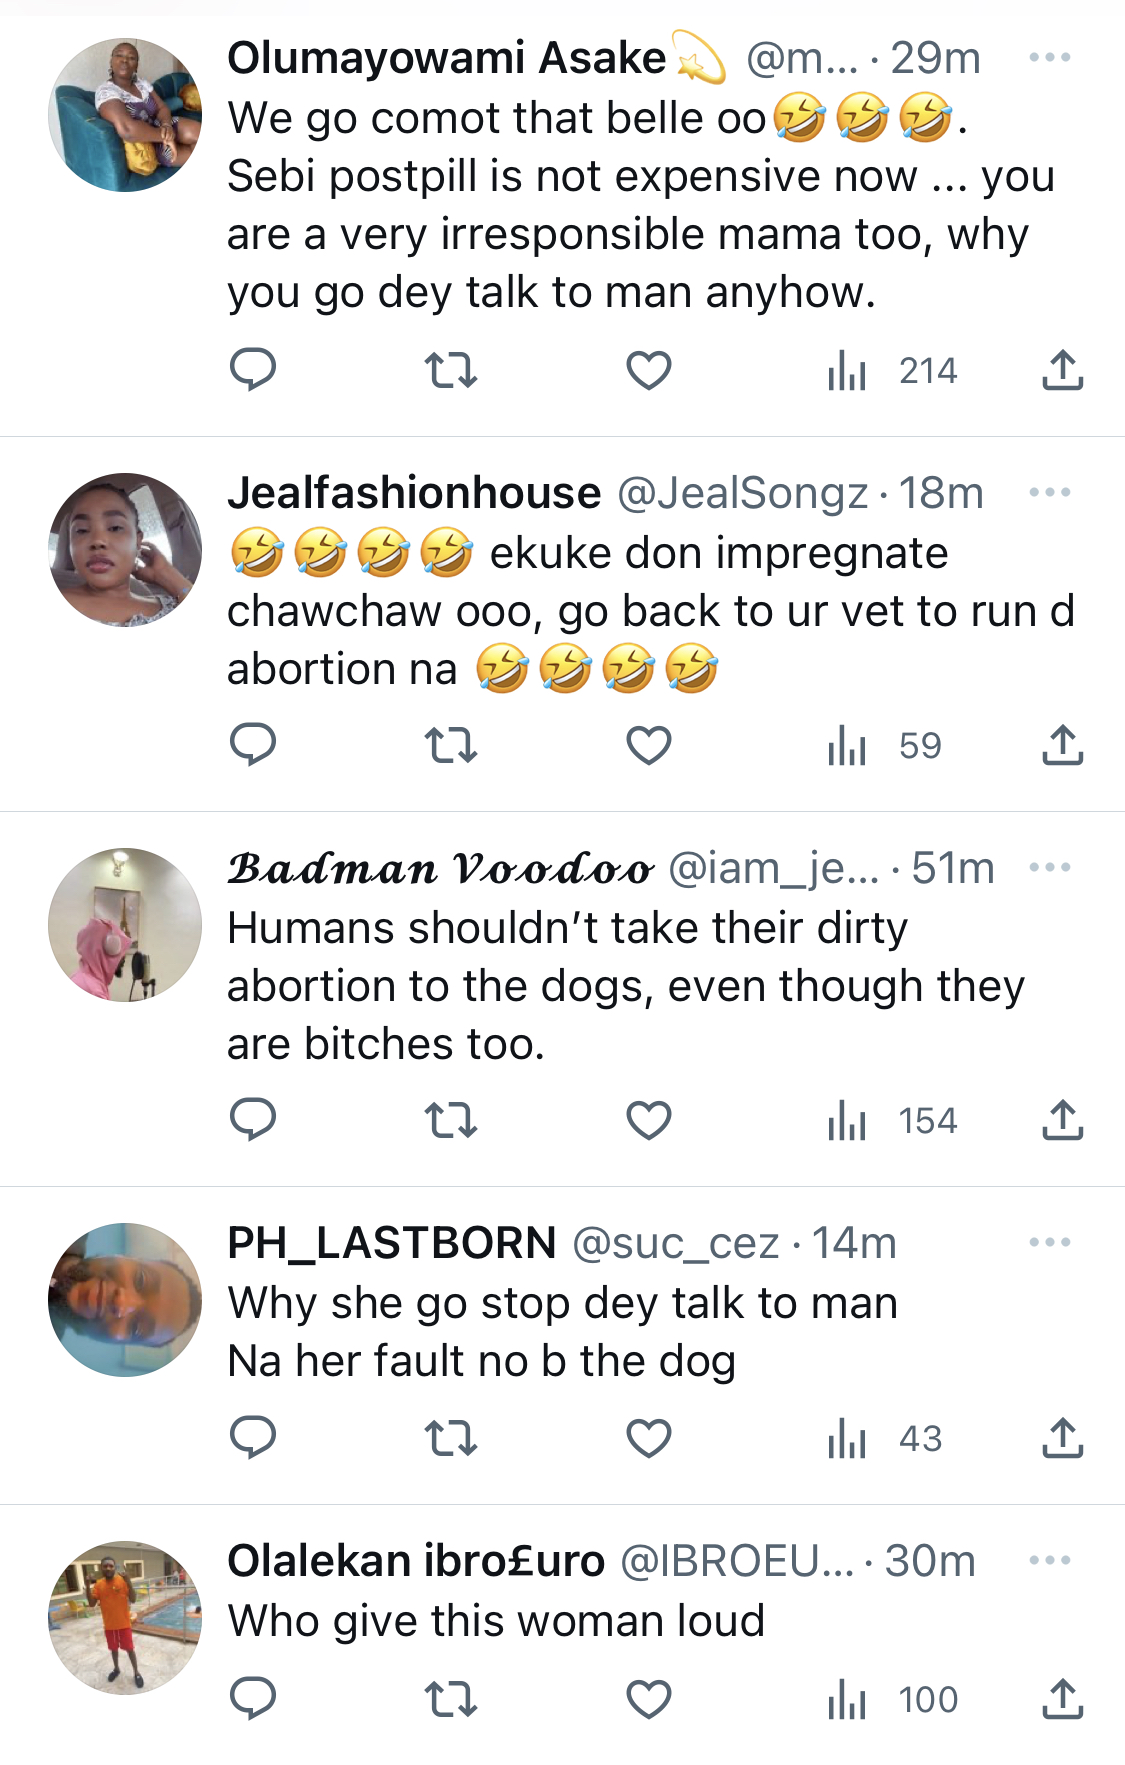 Where can I do abortion for her - Woman laments as her dog comes home with pregnancy from neighbor’s dog [video]